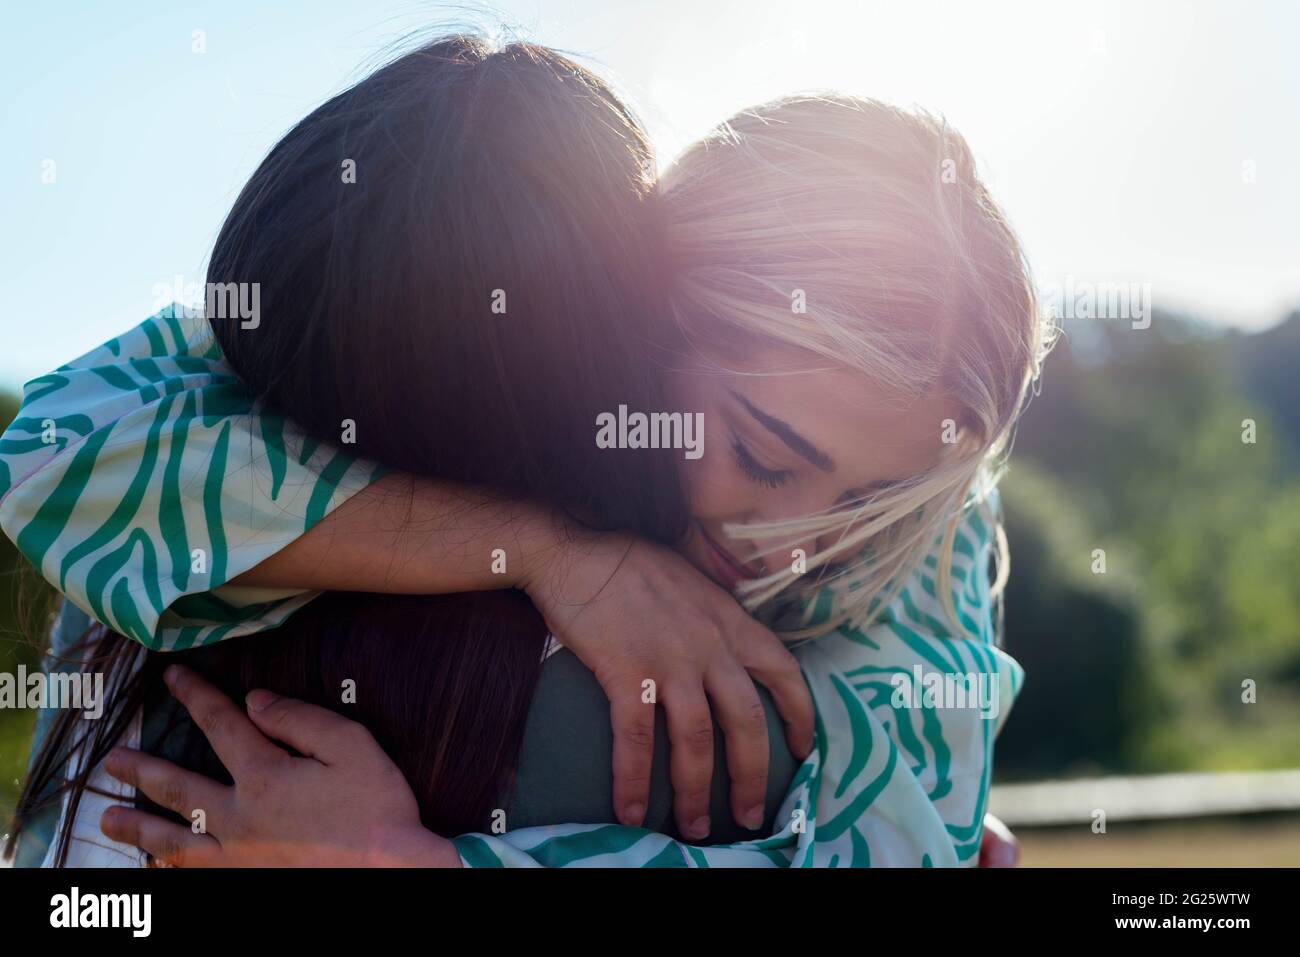 Smiling girls hugging each other Stock Photo